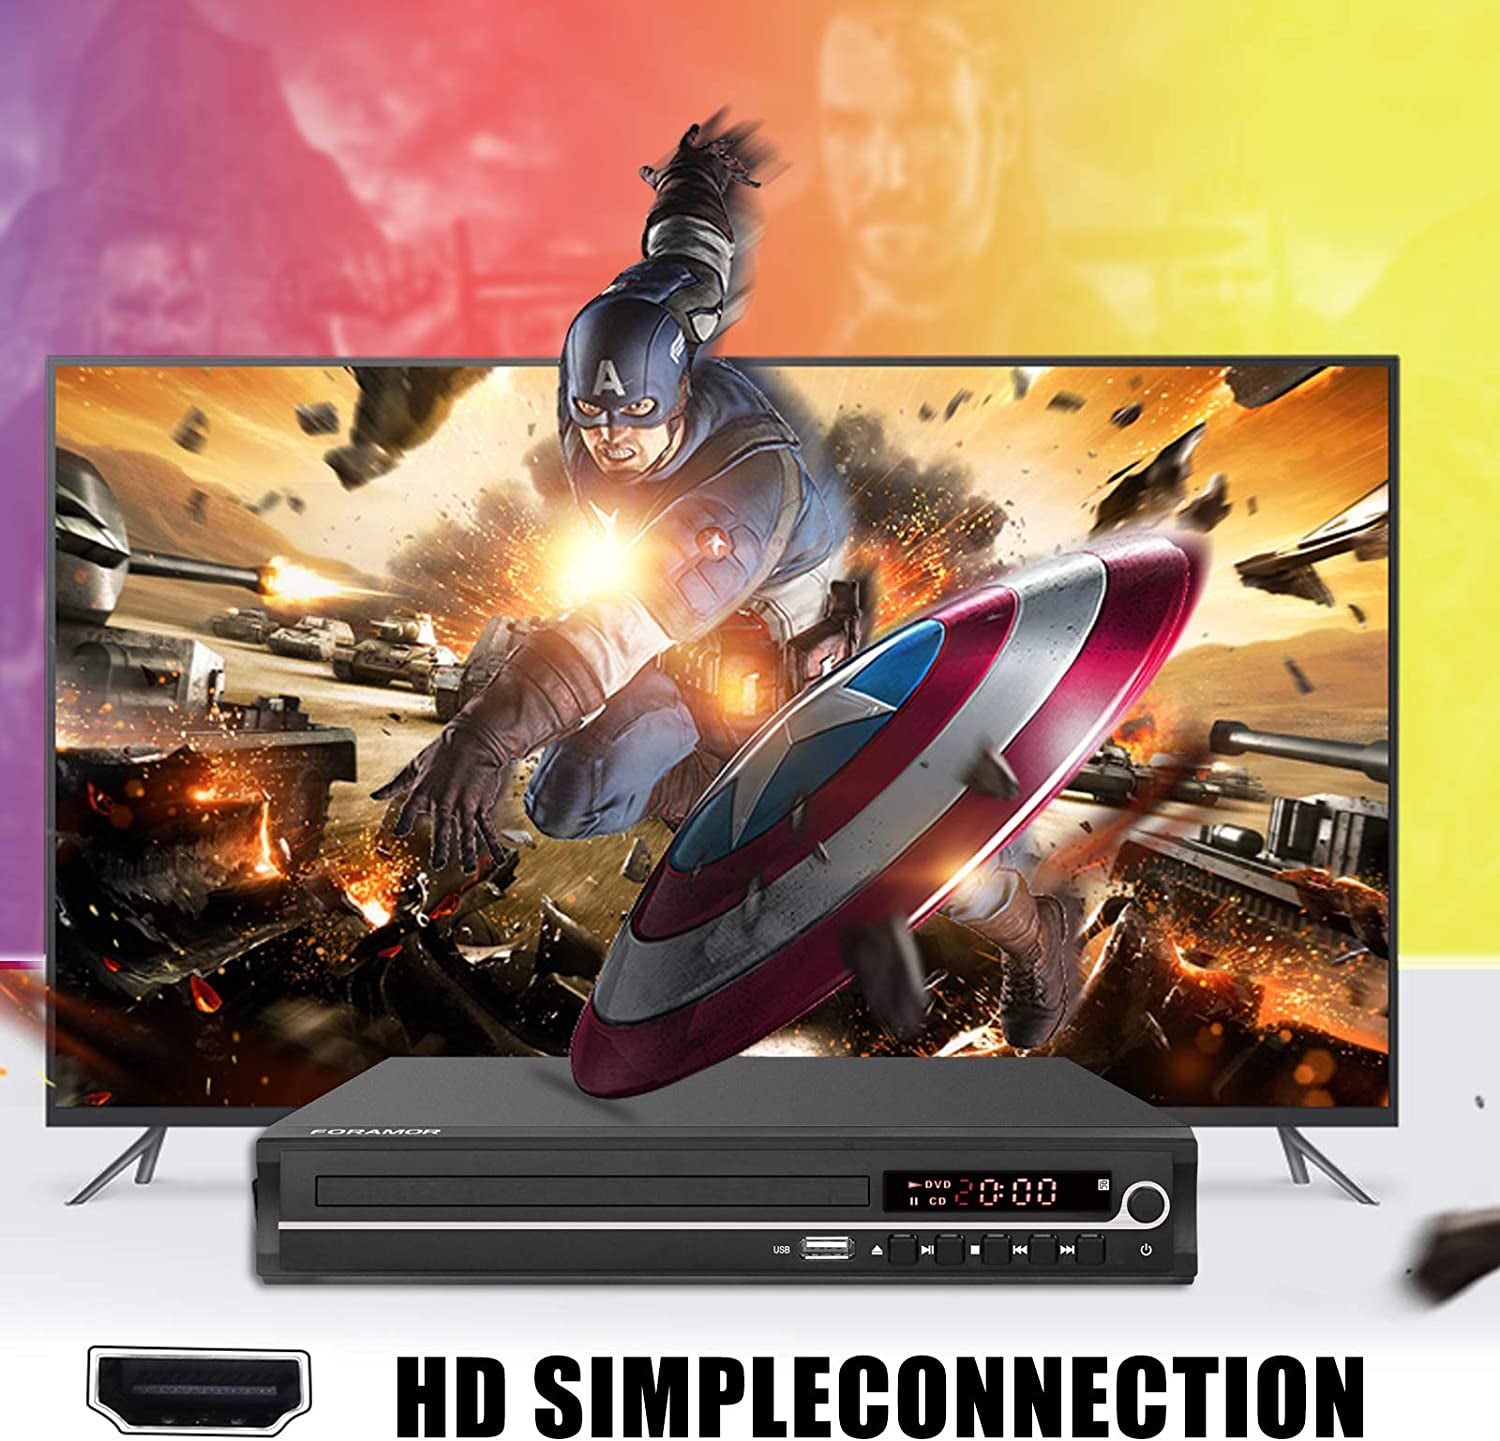  HDMI DVD Player for Smart TV, High-Quality 1080P Full HD, Remote Control, USB Input, Region Free - Includes HDMI Cable